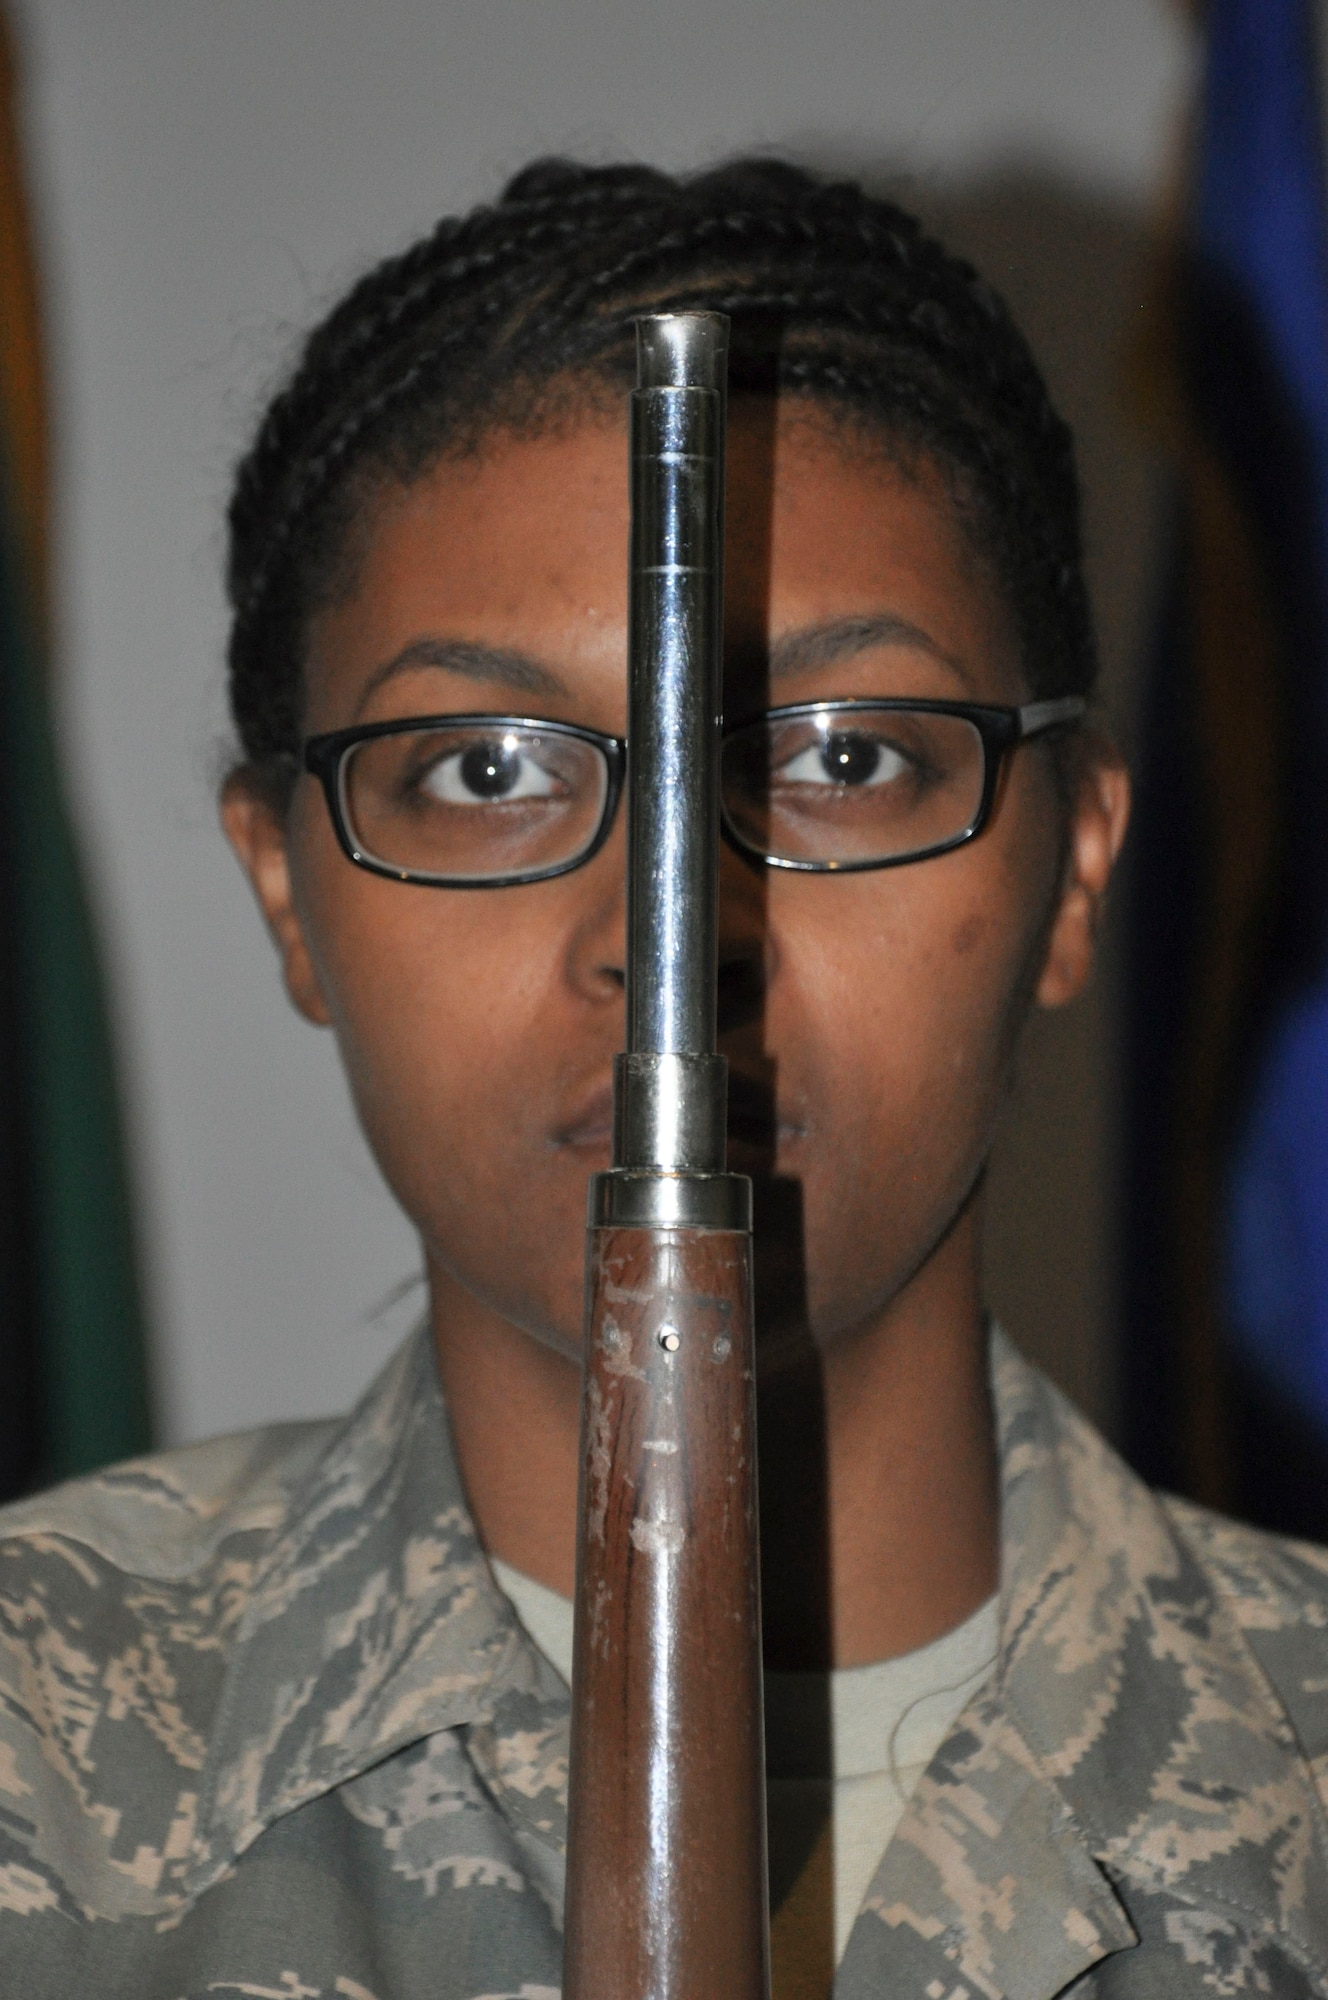 Ceremonial guardsman Senior Airman Shawnell Curry demonstrates unflinching bearing while bearing her rifle at the position of attention Tuesday, May 30, 2017, at the base theater at an undisclosed location in Southwest Asia..  Curry is a reservist deployed from the 30th Aerial Port Squadron at Charleston Air Force Base, S.C.